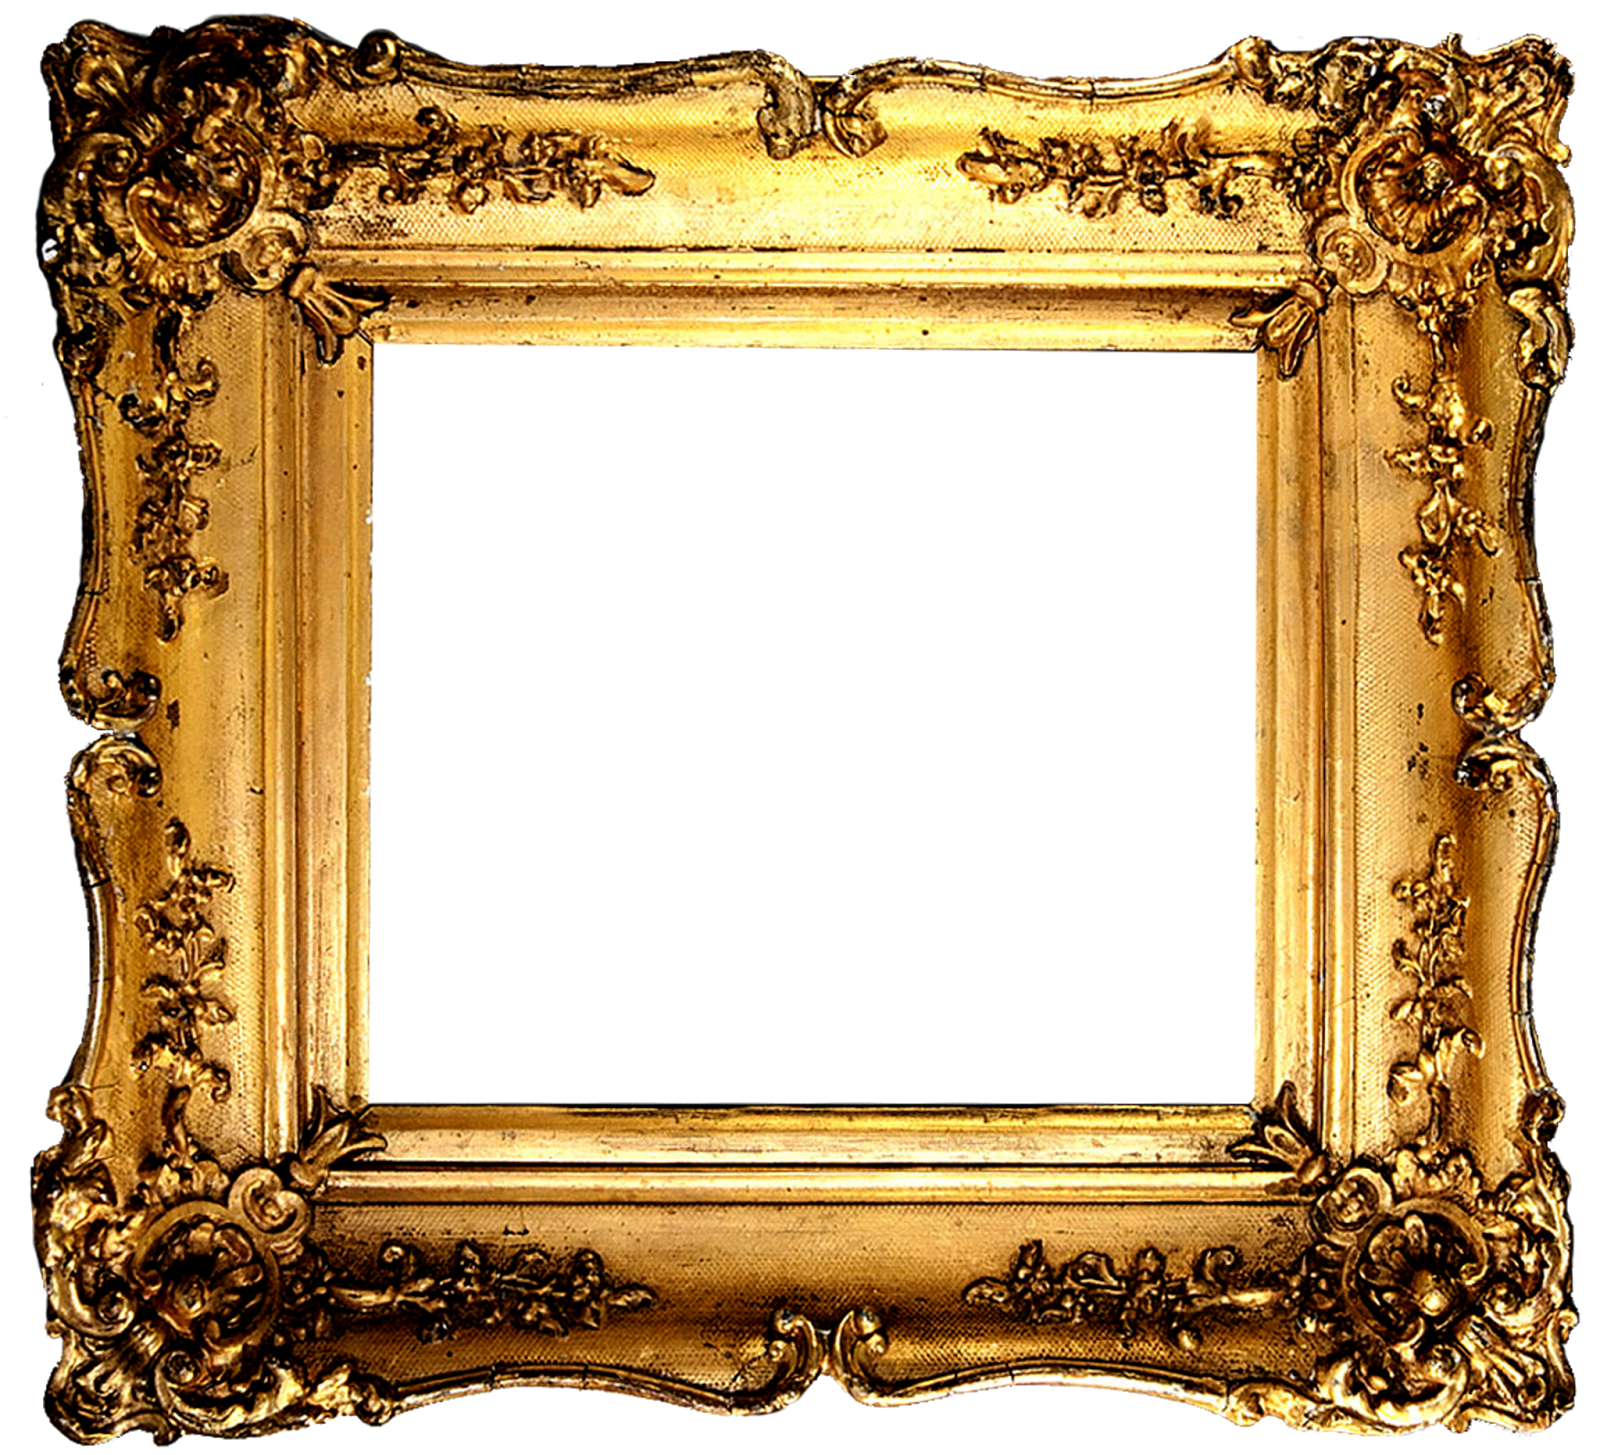 picture-photo-frame-png-transparent-image-download-size-1920x1440px